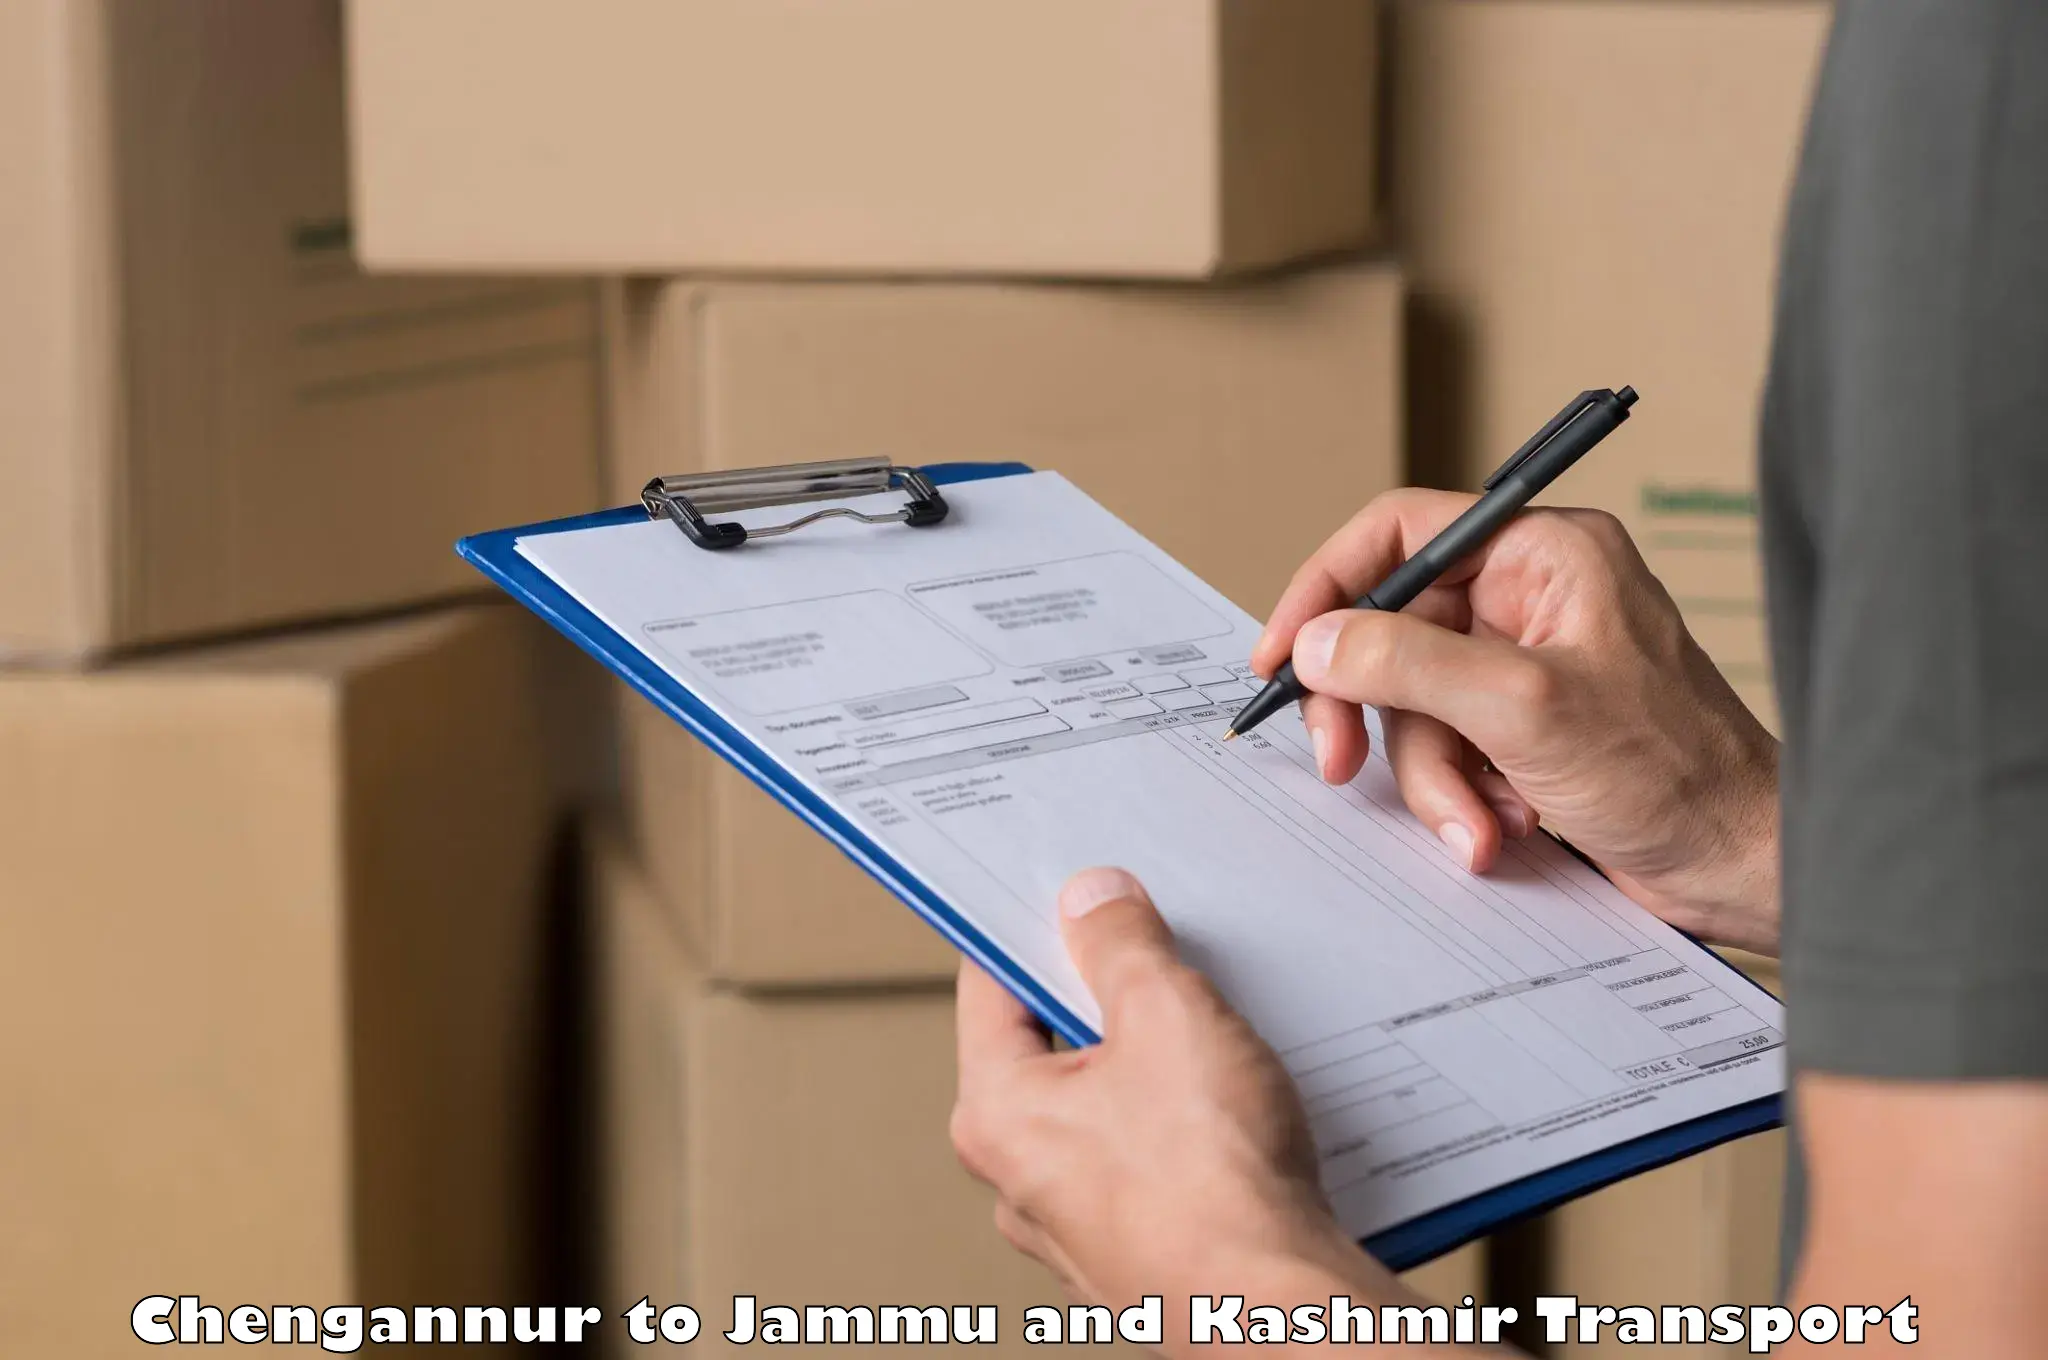 All India transport service Chengannur to Jammu and Kashmir